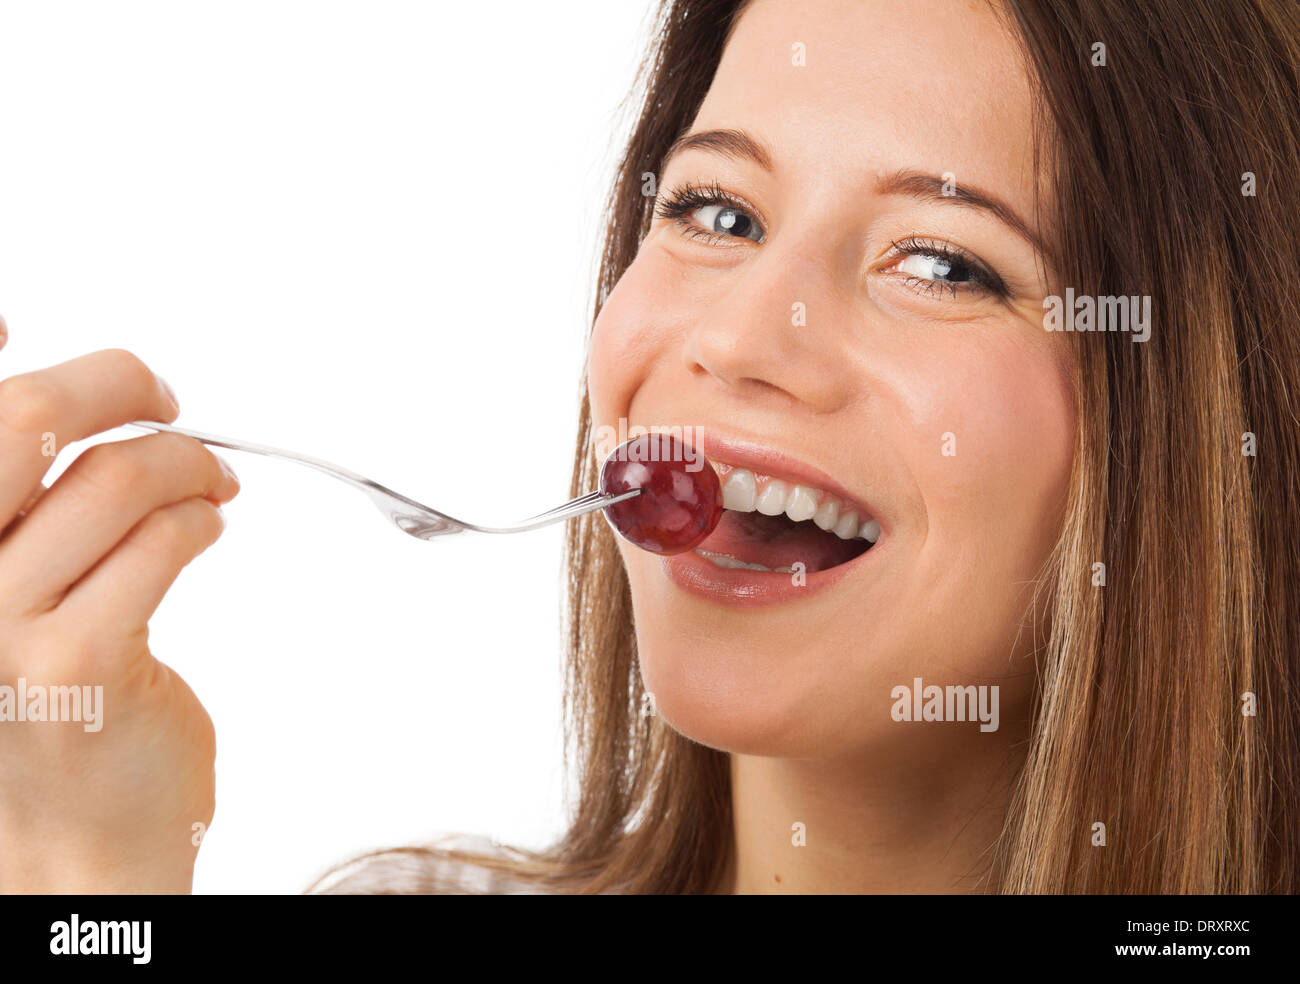 Close up portrait of a nice woman eating grape, isolated on white Stock Photo